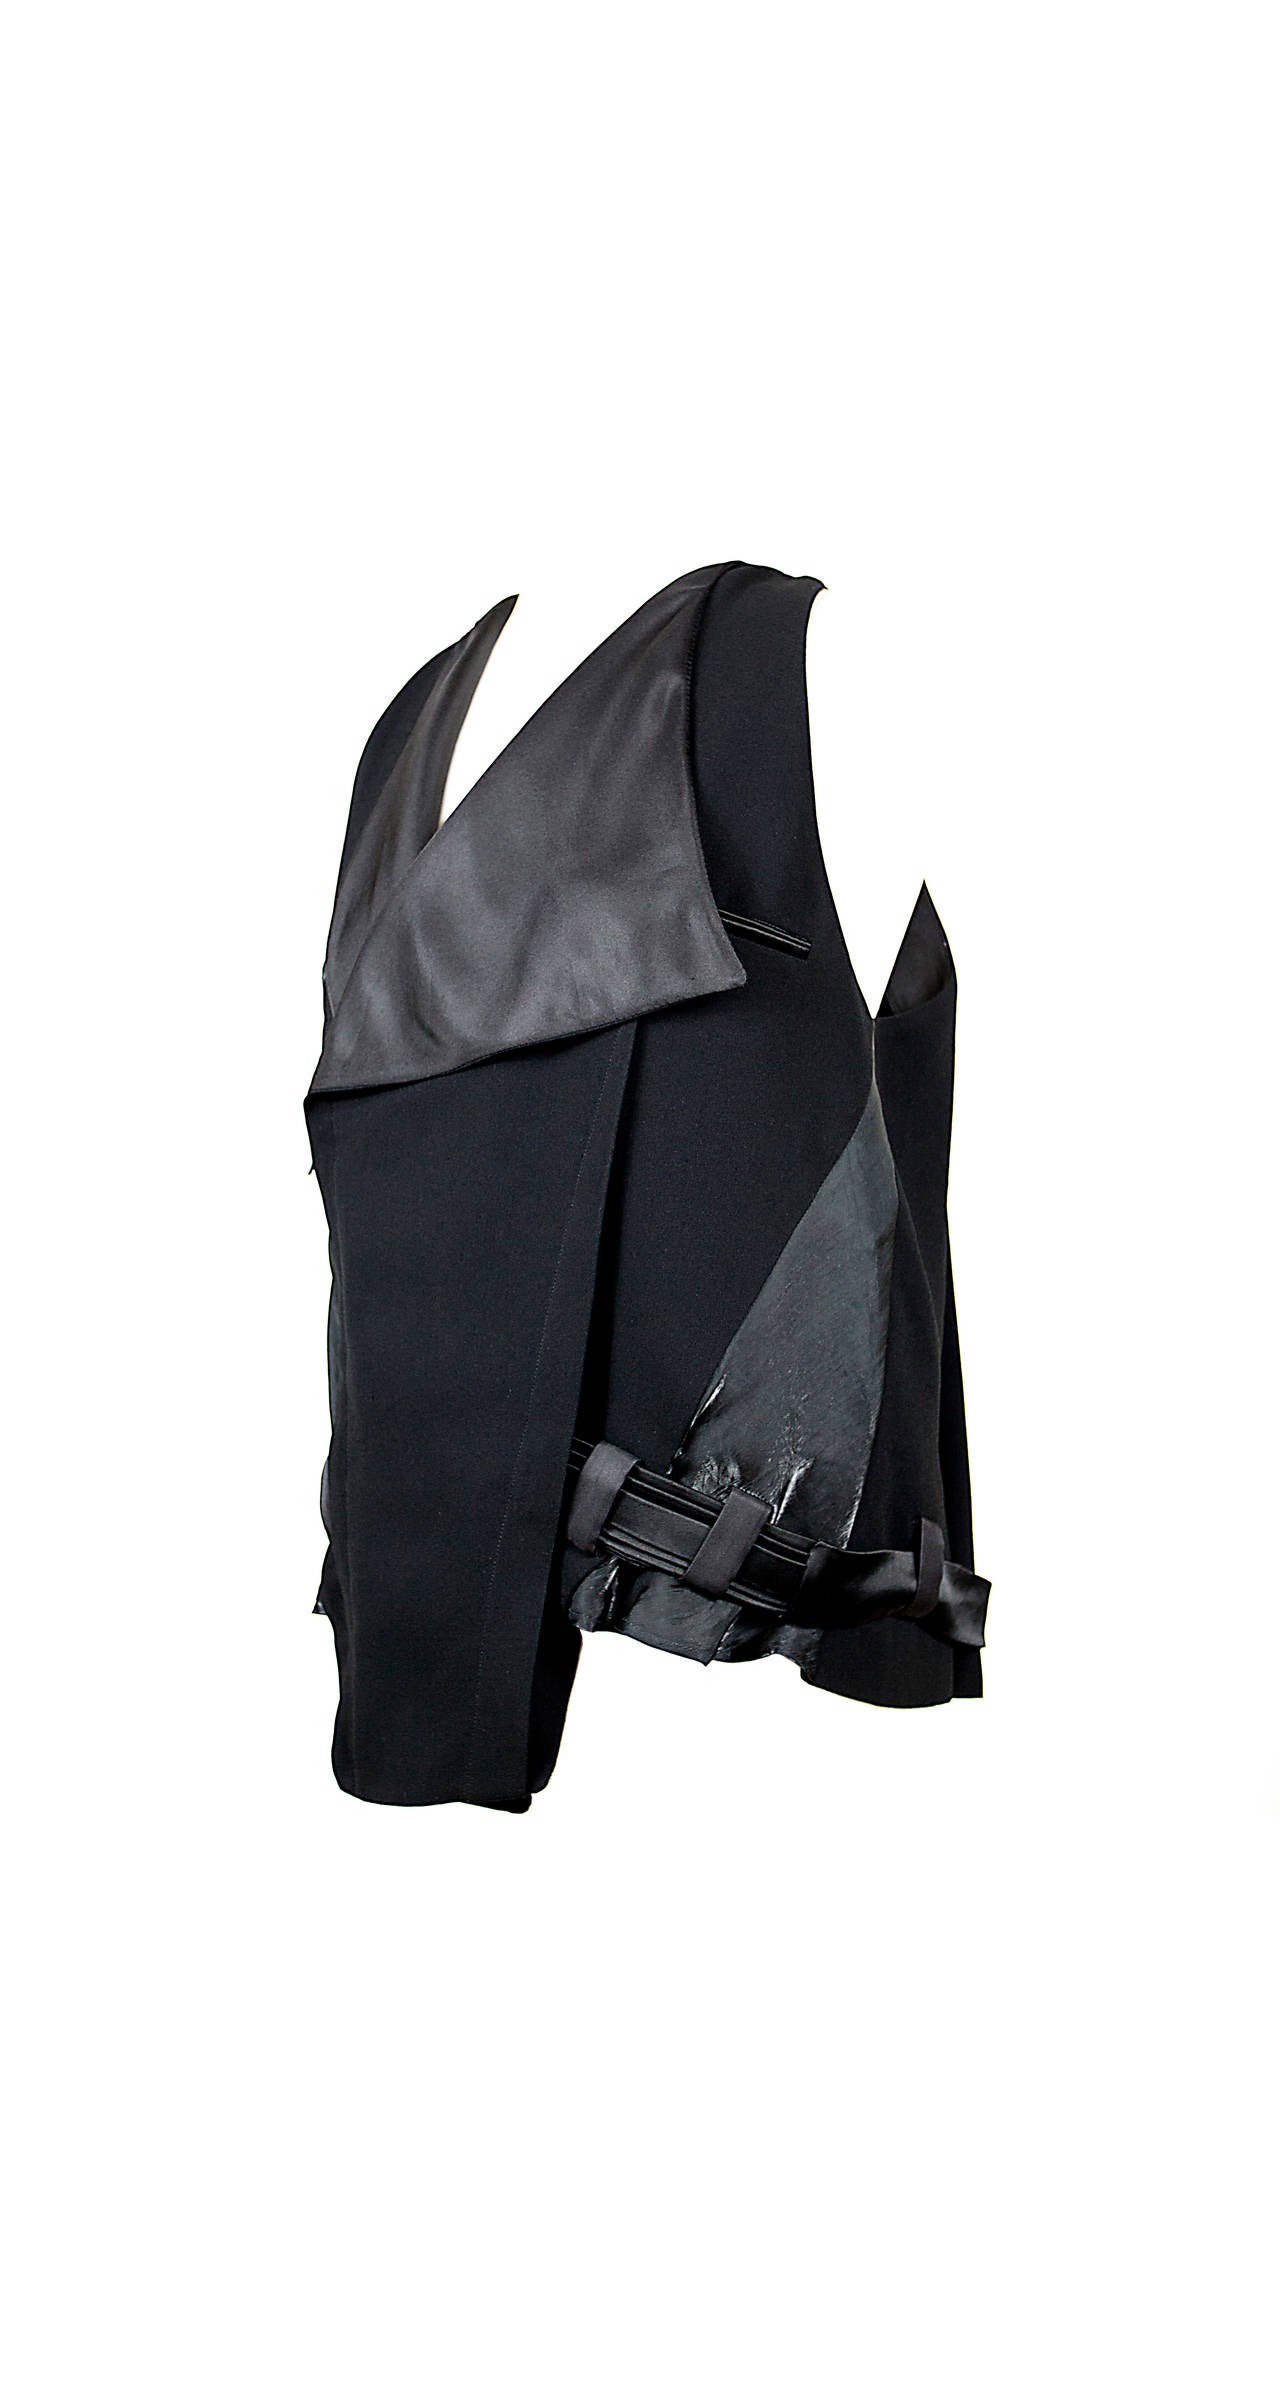 This iconic designer left an impression on modern fashion design. This vest has all the makings of a classic piece from Nicolas Ghesquière, draped crepe and satin front lapel, sleeveless dropped arm hole shape, shiny side front panels in an